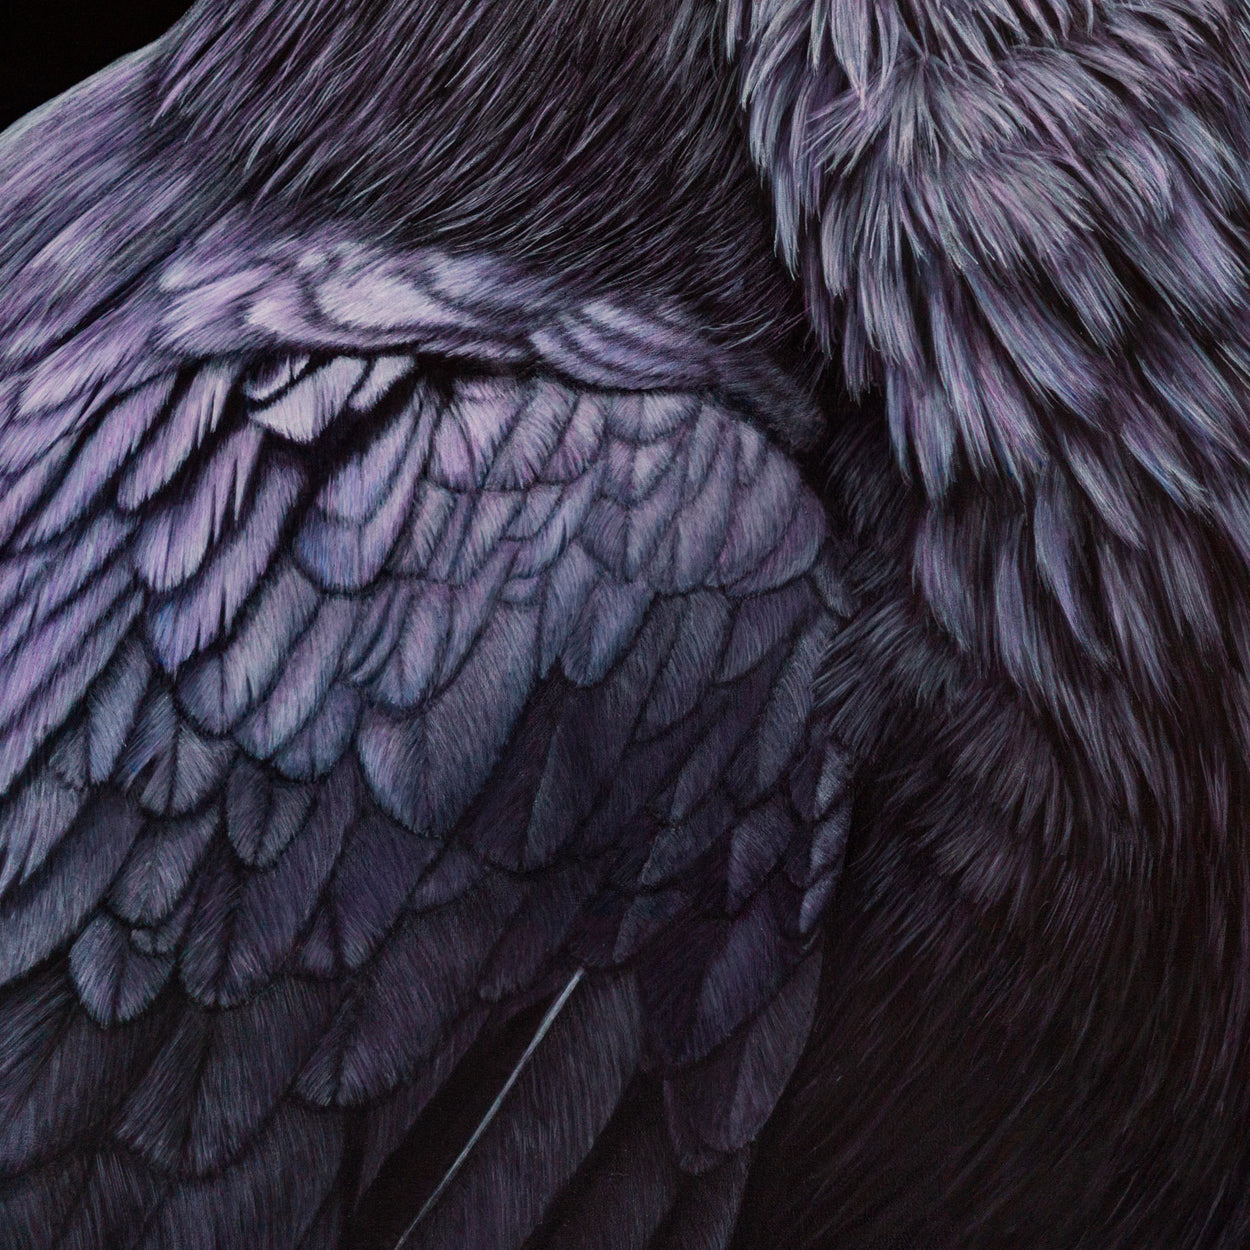 raven painting close-up 2